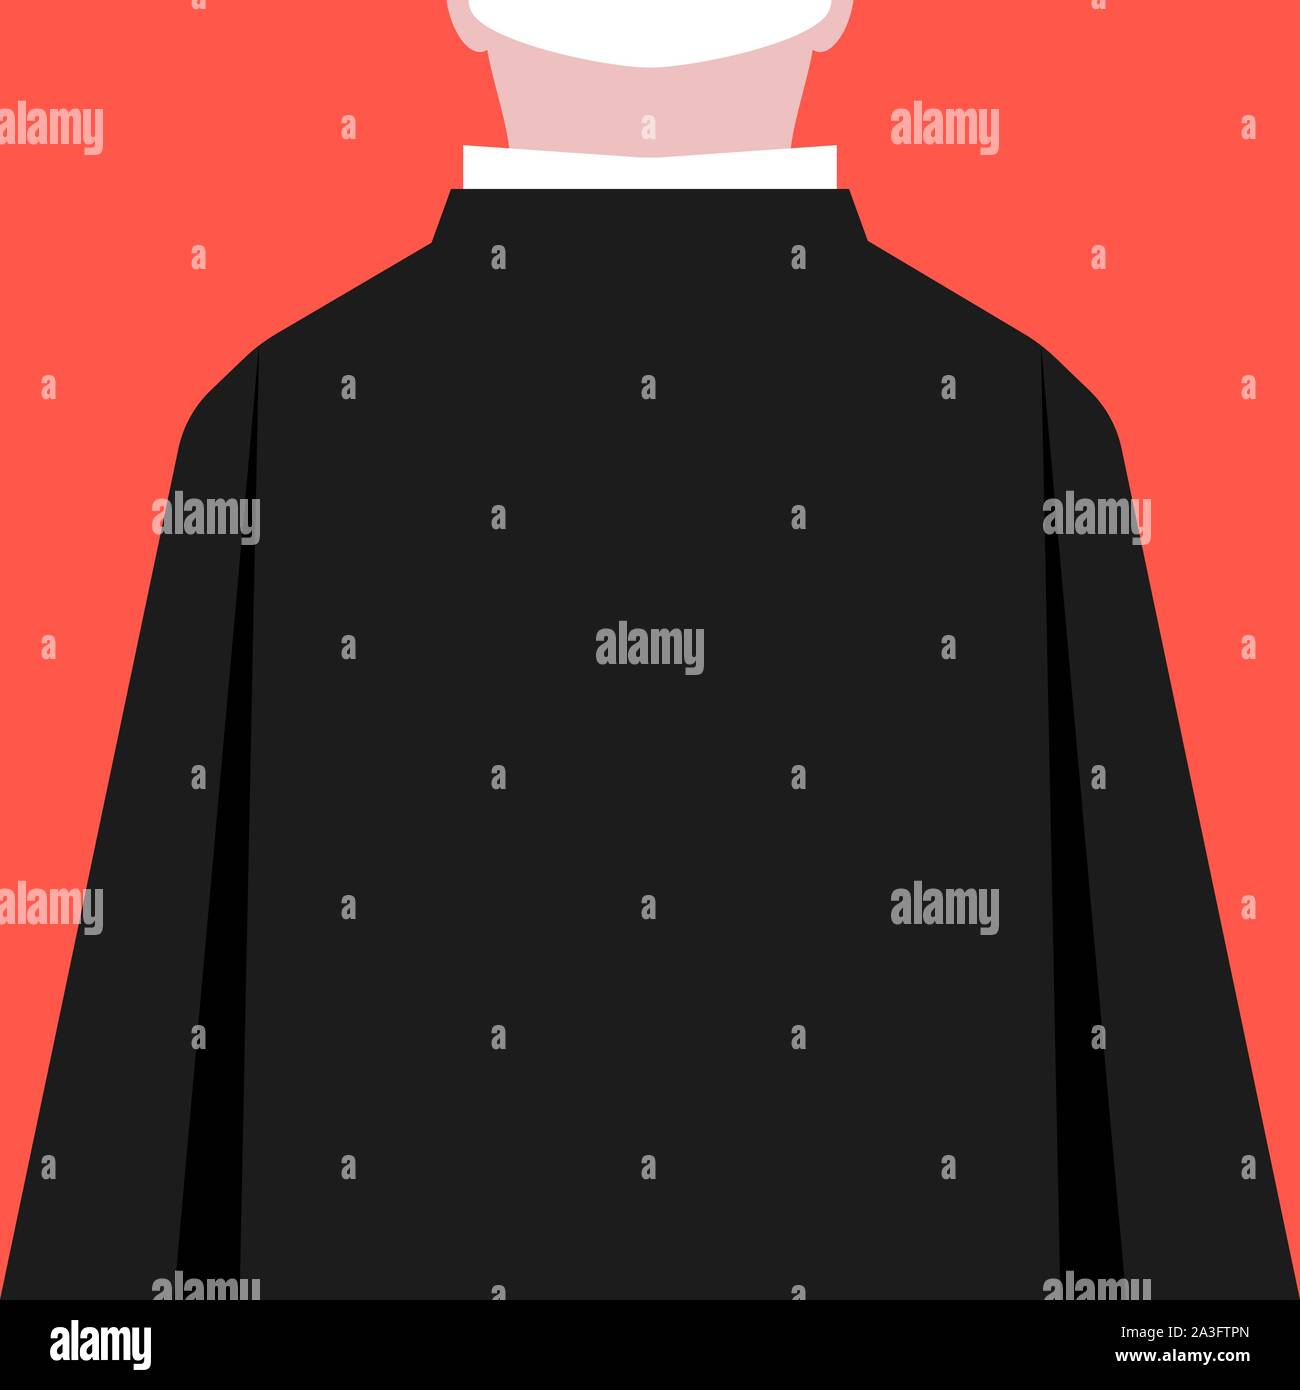 Monk clothing Stock Vector Images - Alamy